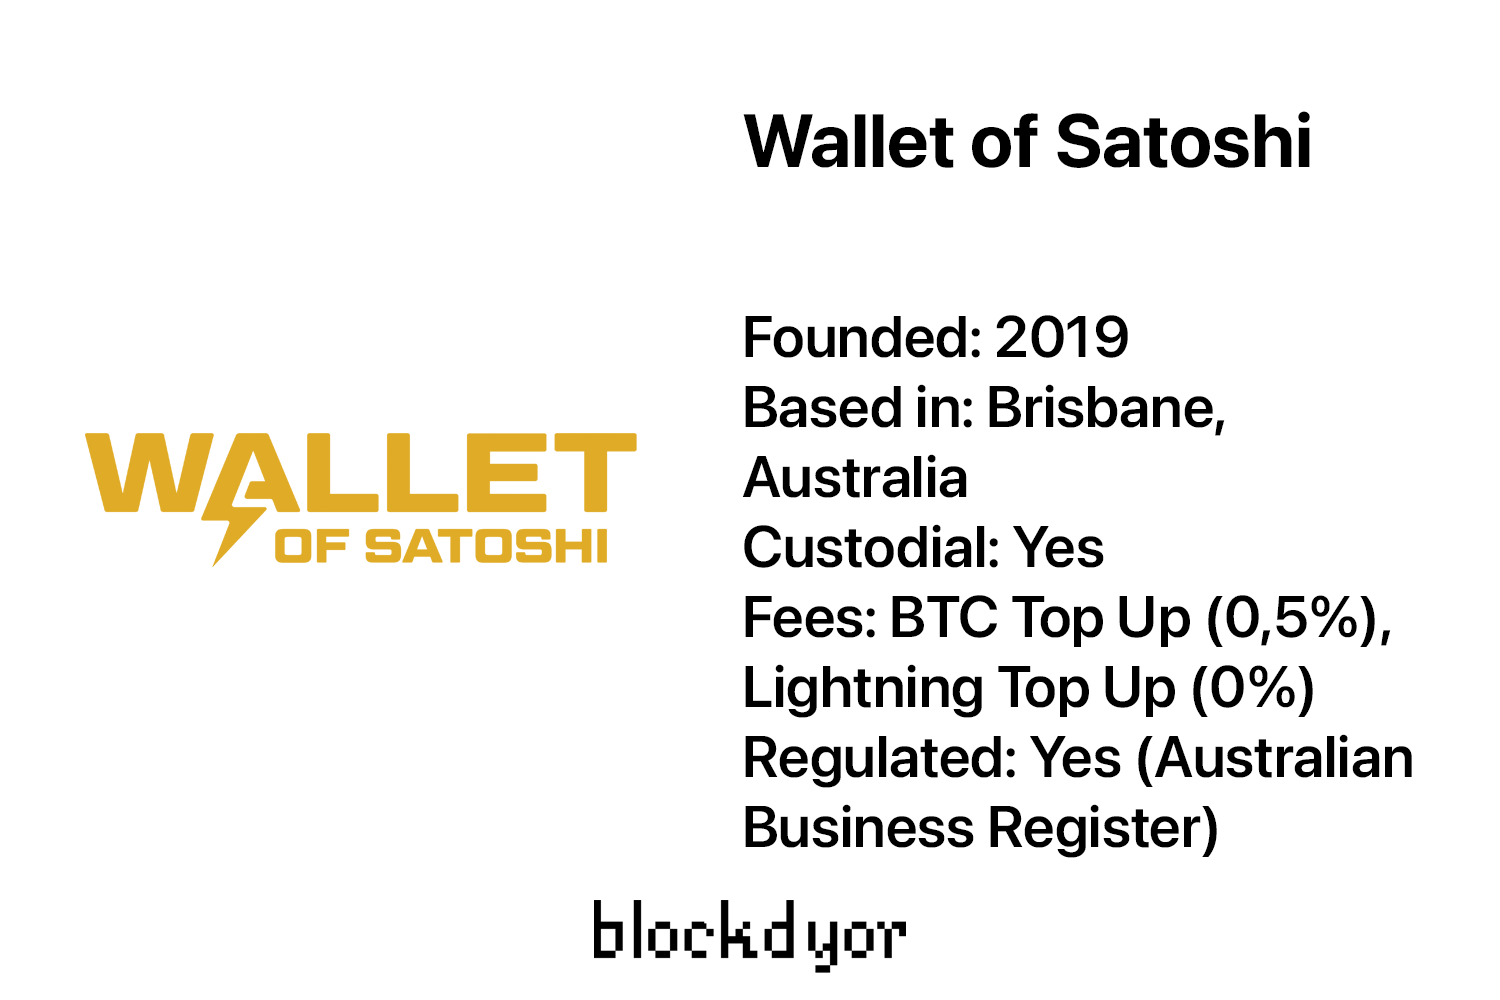 Wallet Of Satoshi Overview